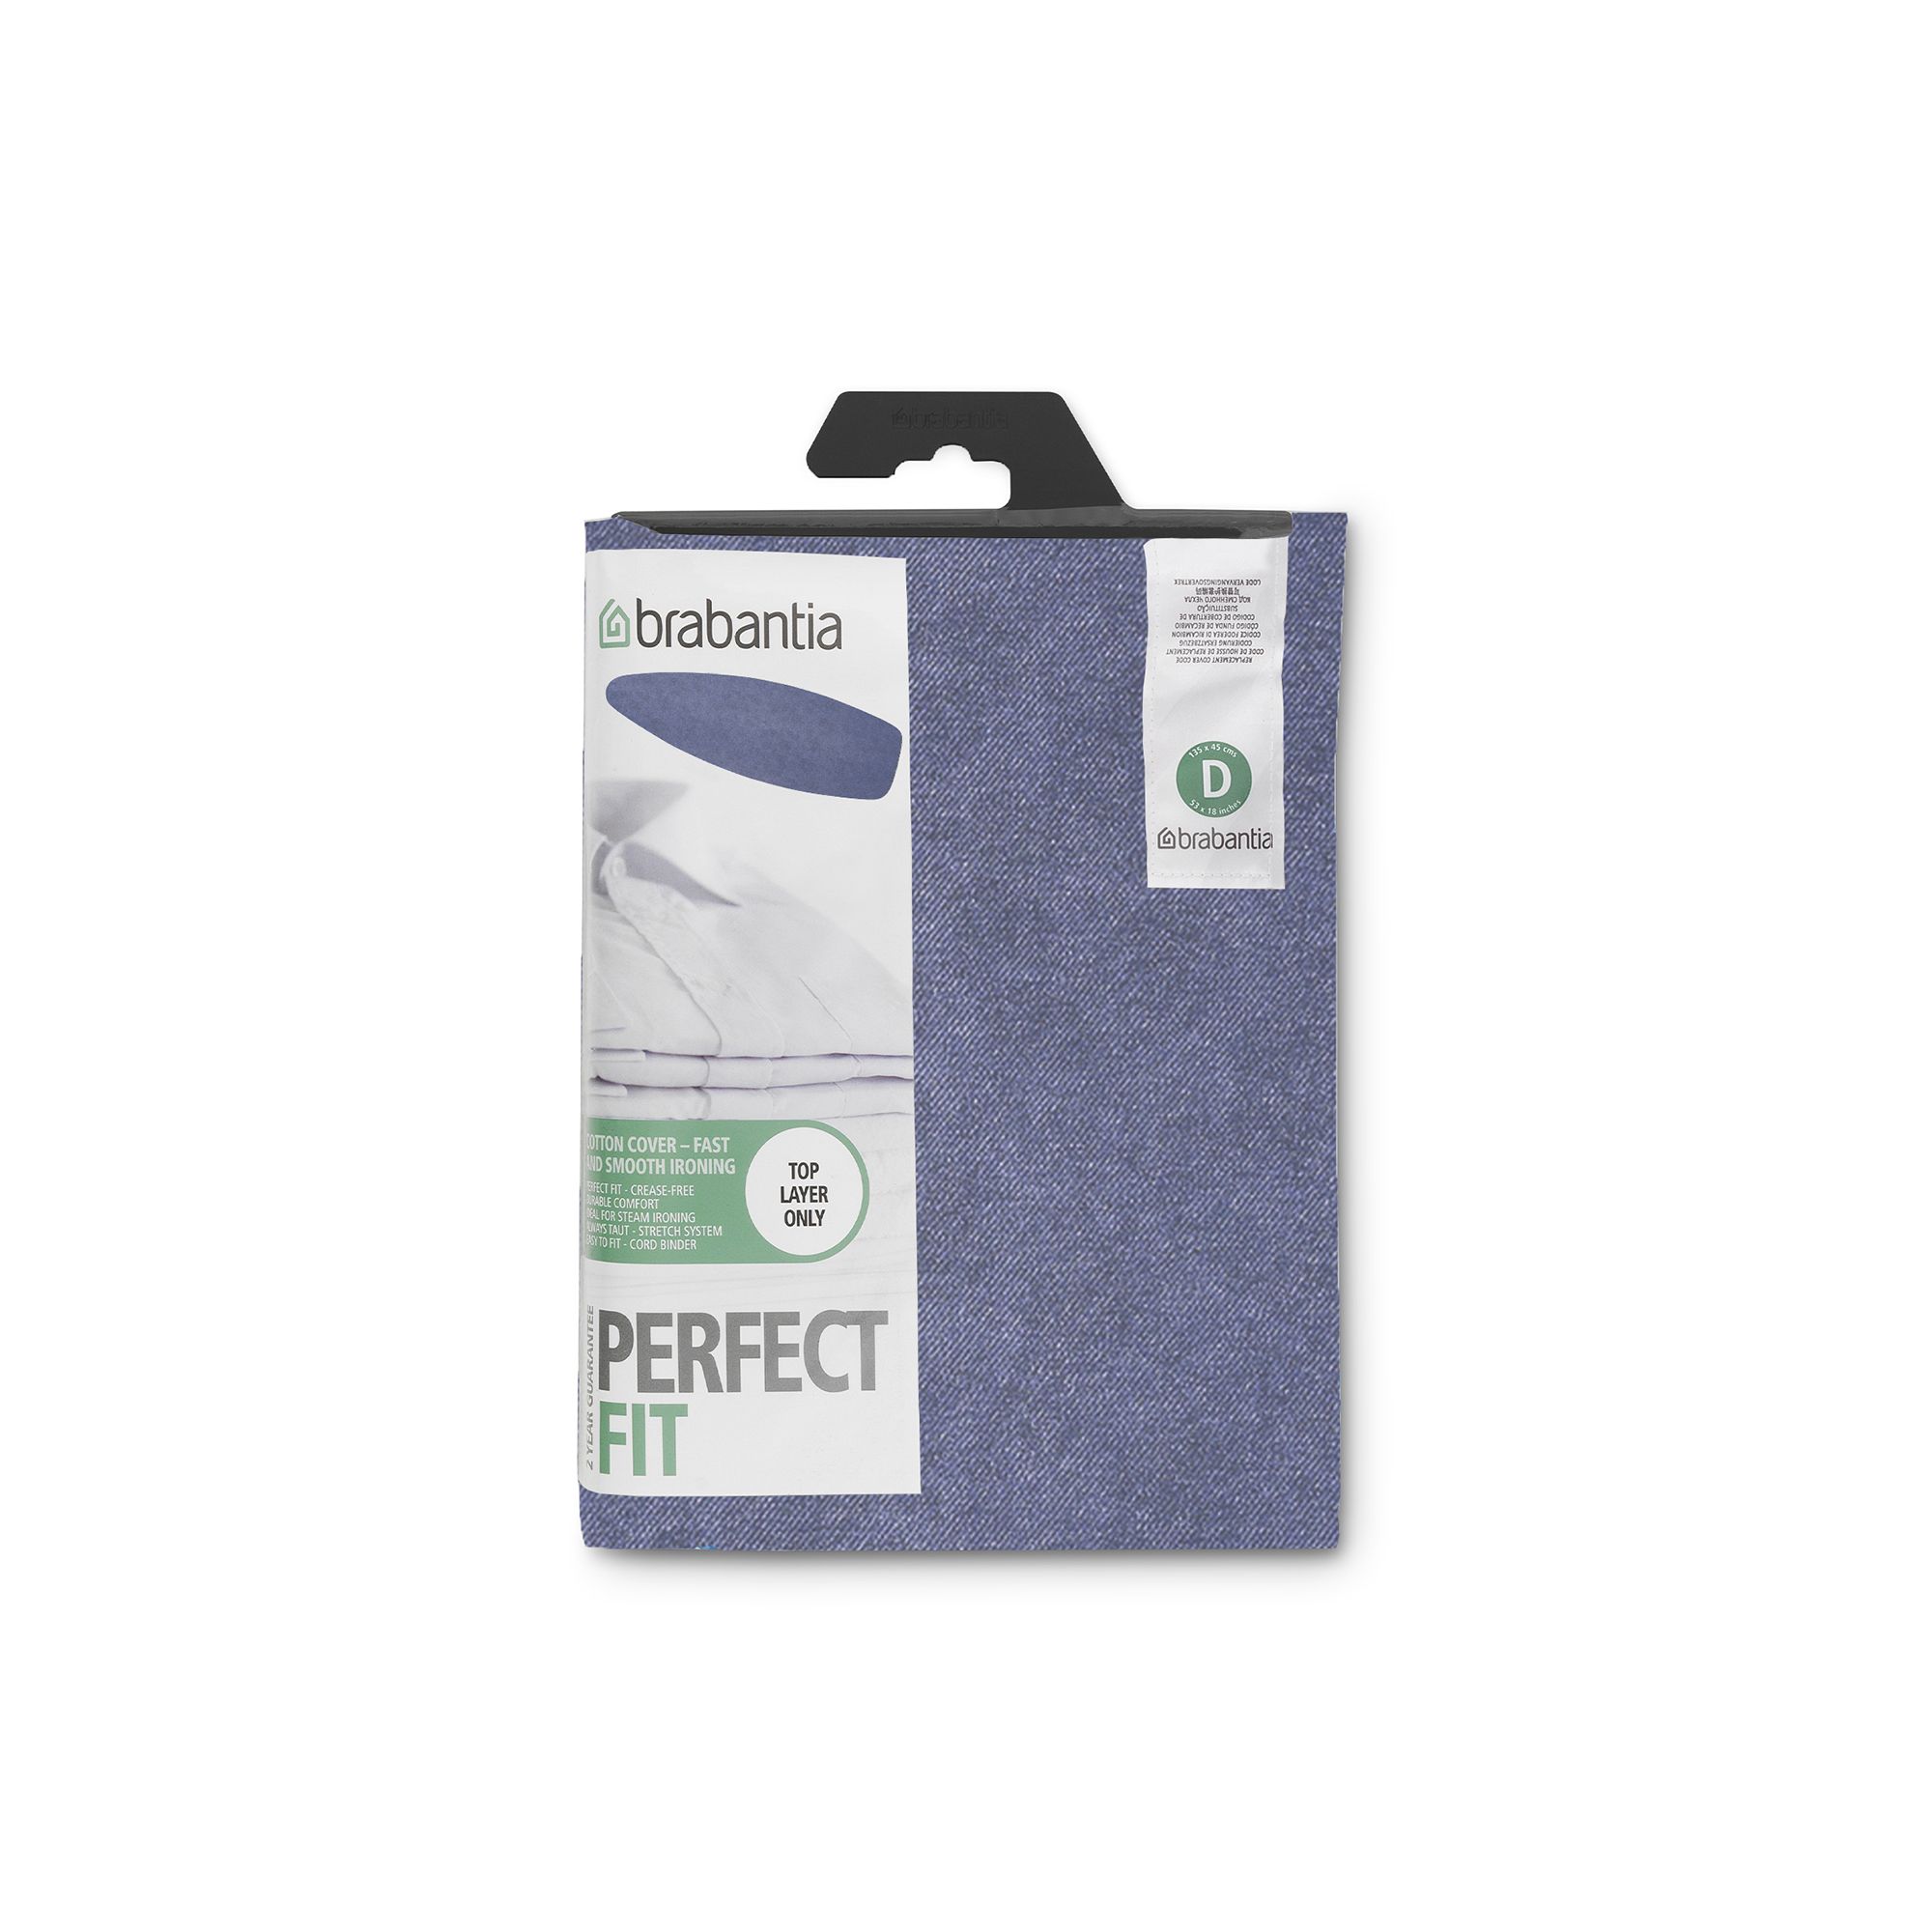 Brabantia Mixed neutral Perfect fit Elasticated Ironing board cover (L)147cm (W)55.5cm